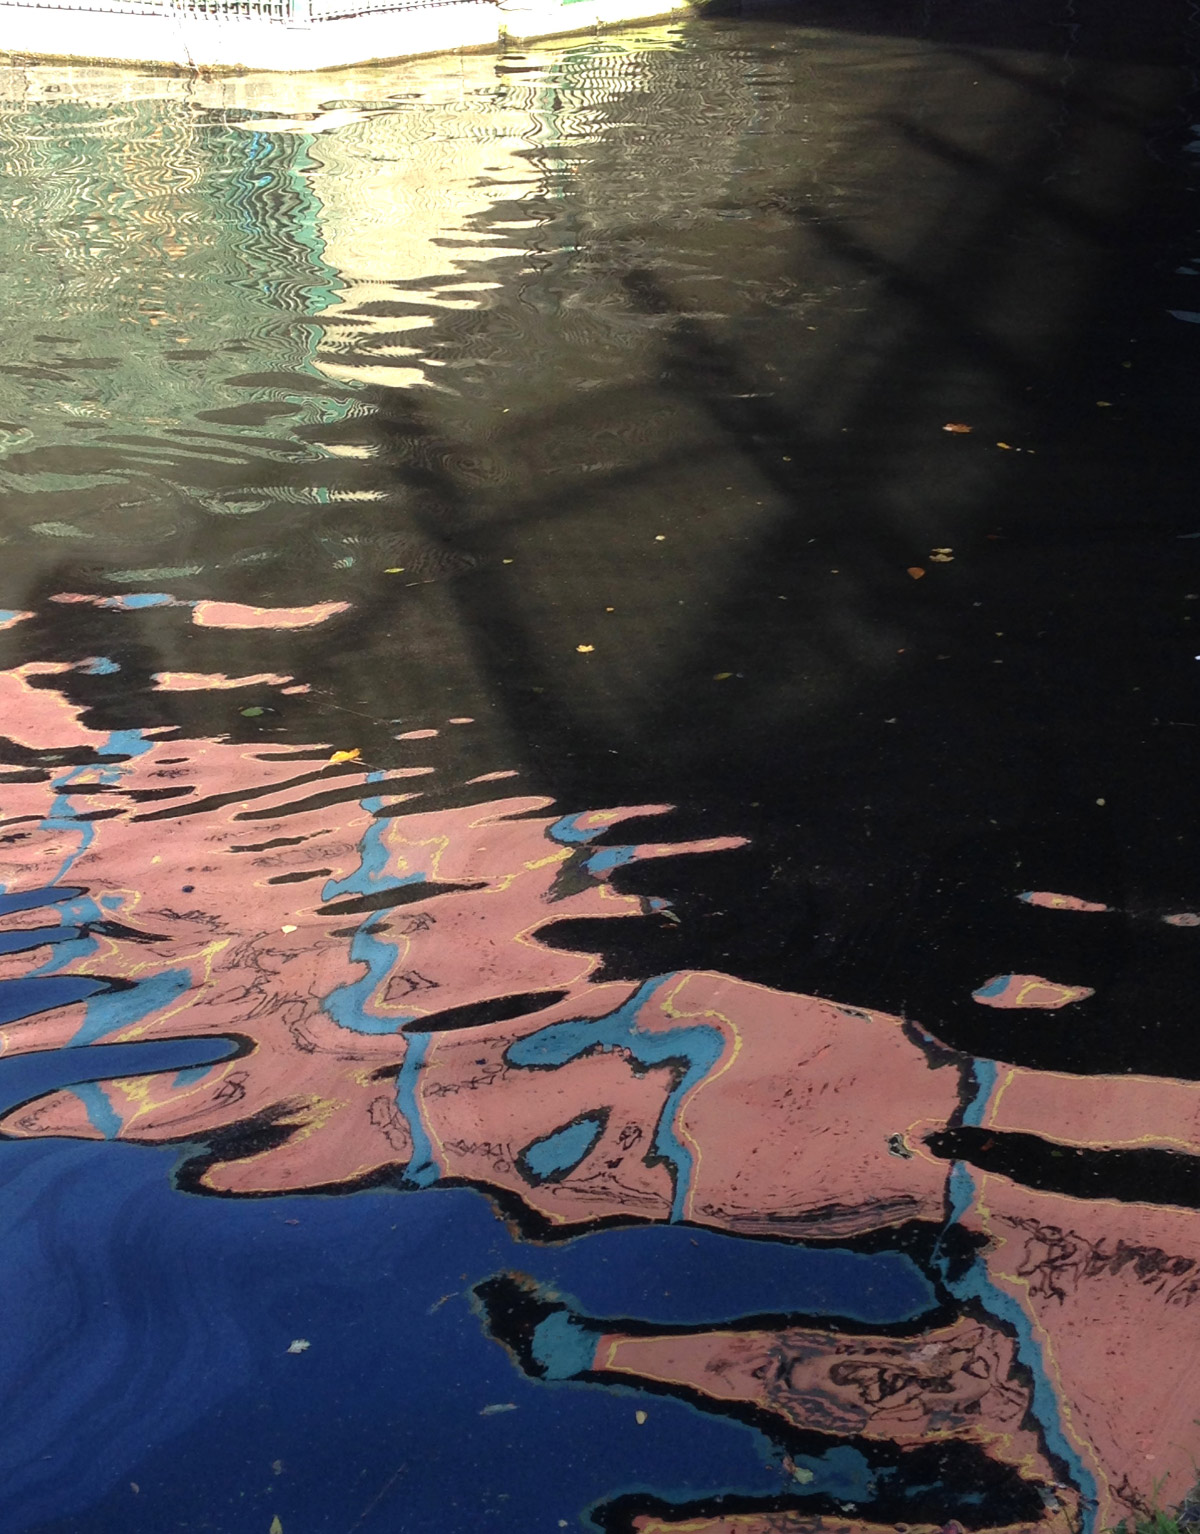 SRH Photography- Mixed Media On Water, 2015